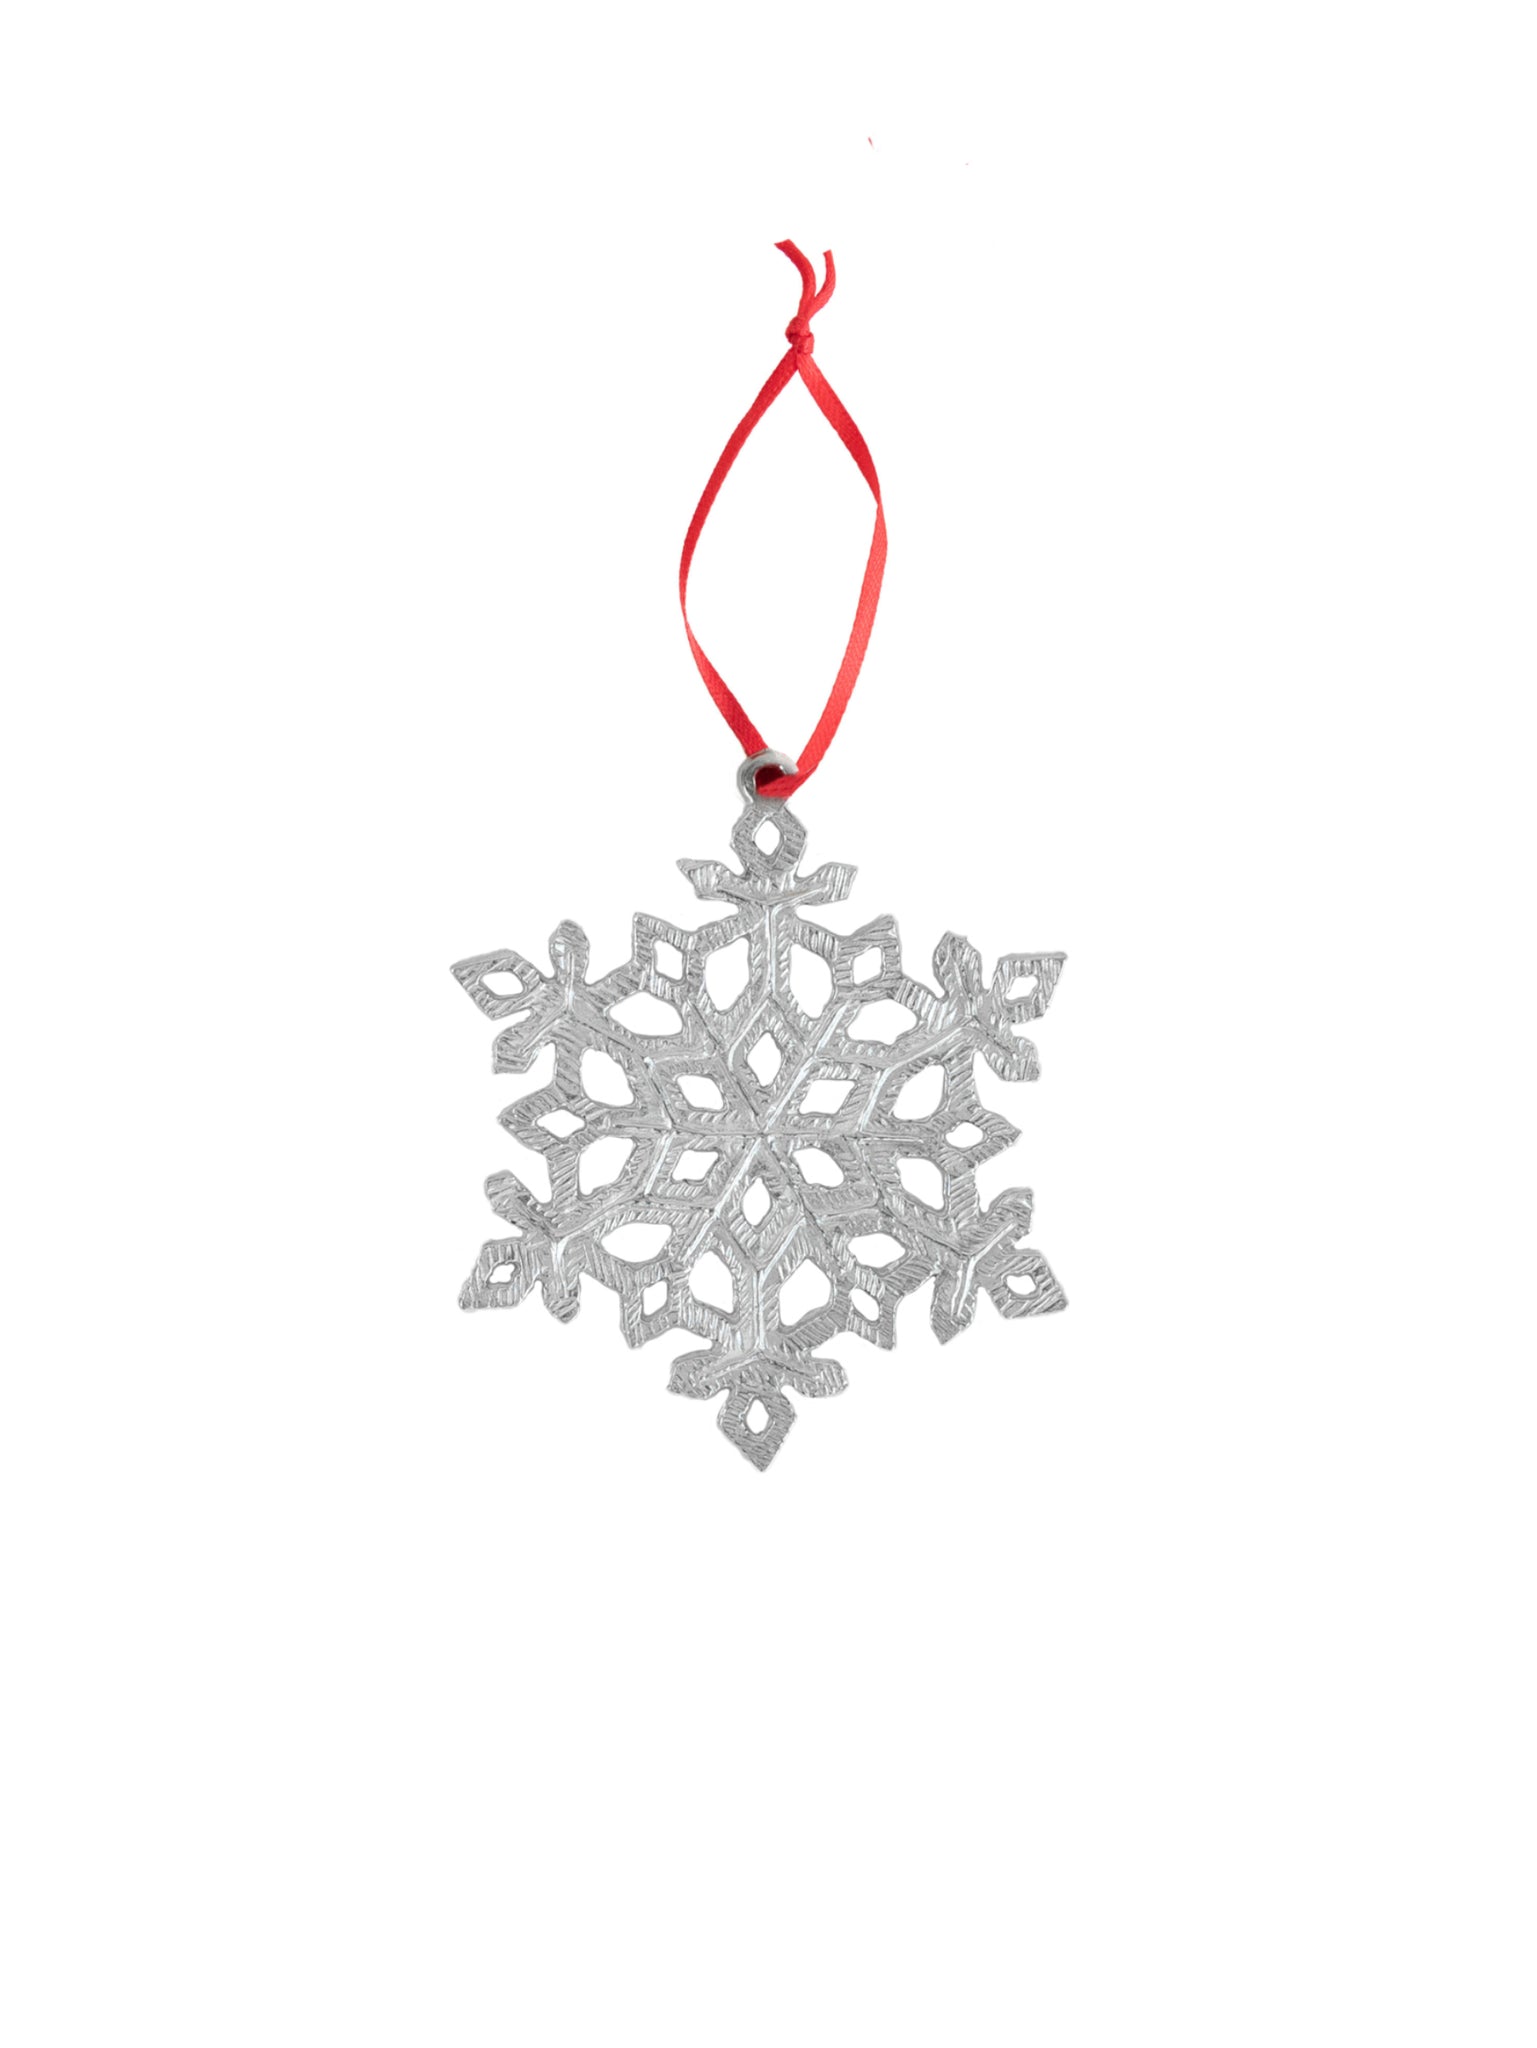 Pewter Northern Lights Snowflake Ornament Weston Table